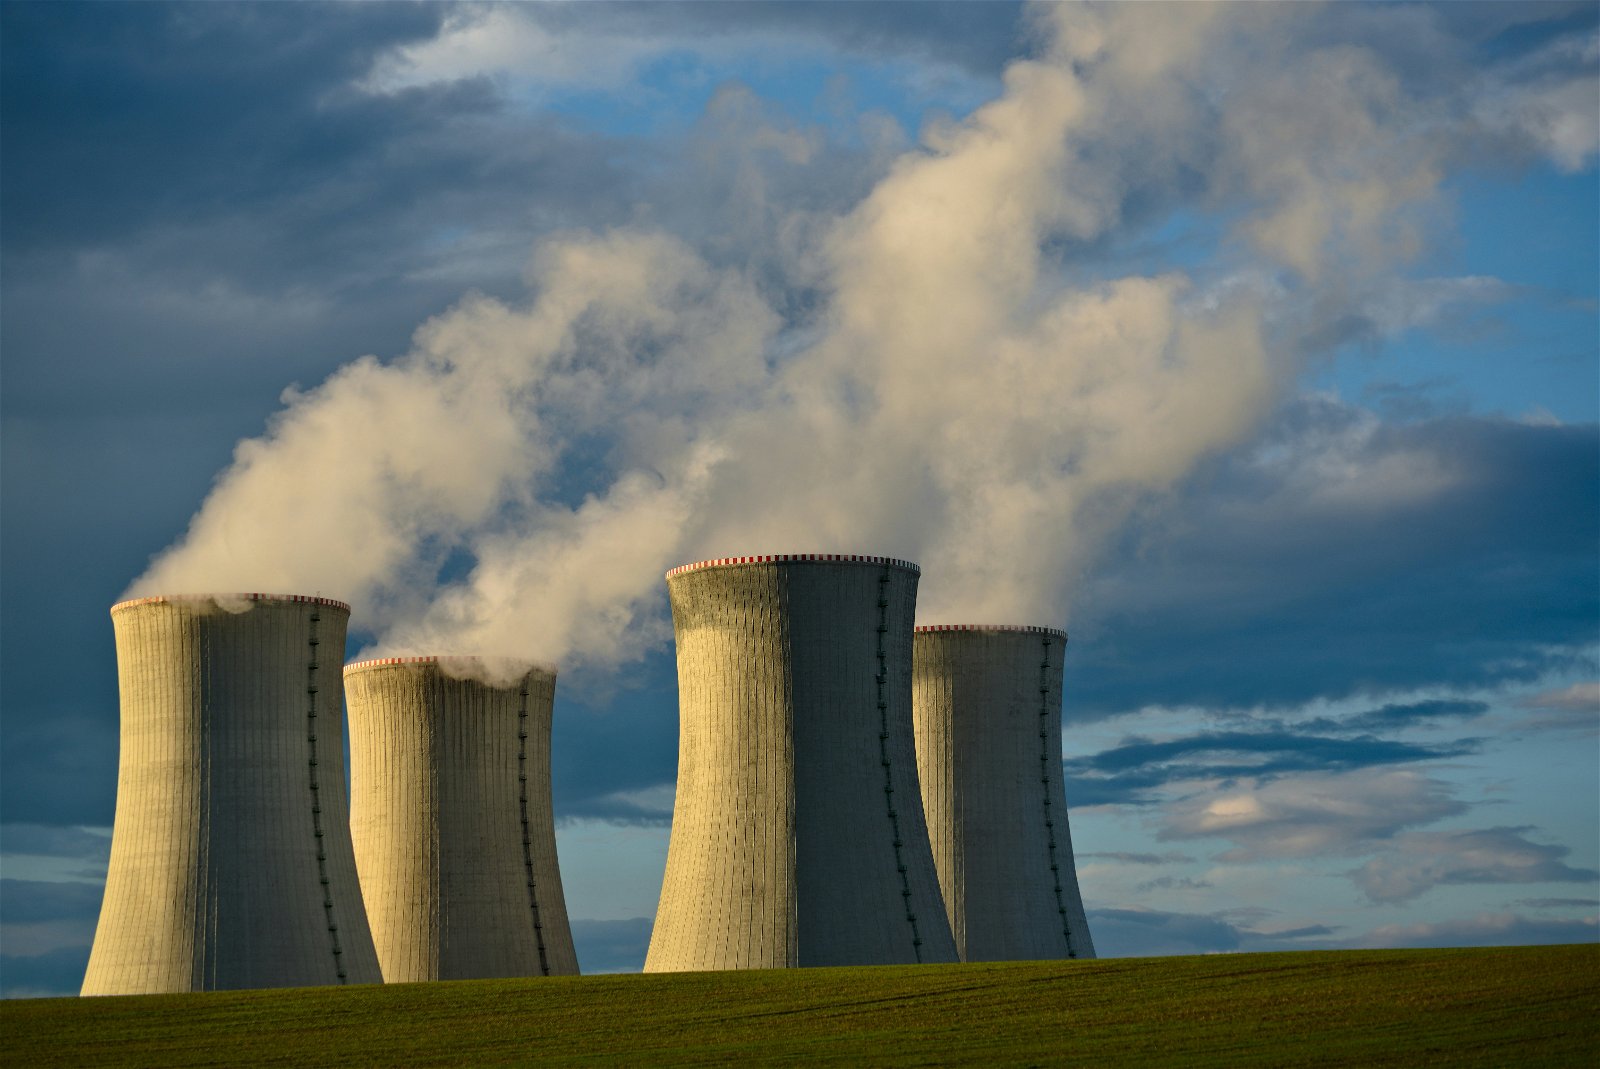 Nuclear economics - lessons from Lazard to Hinkley Point-C